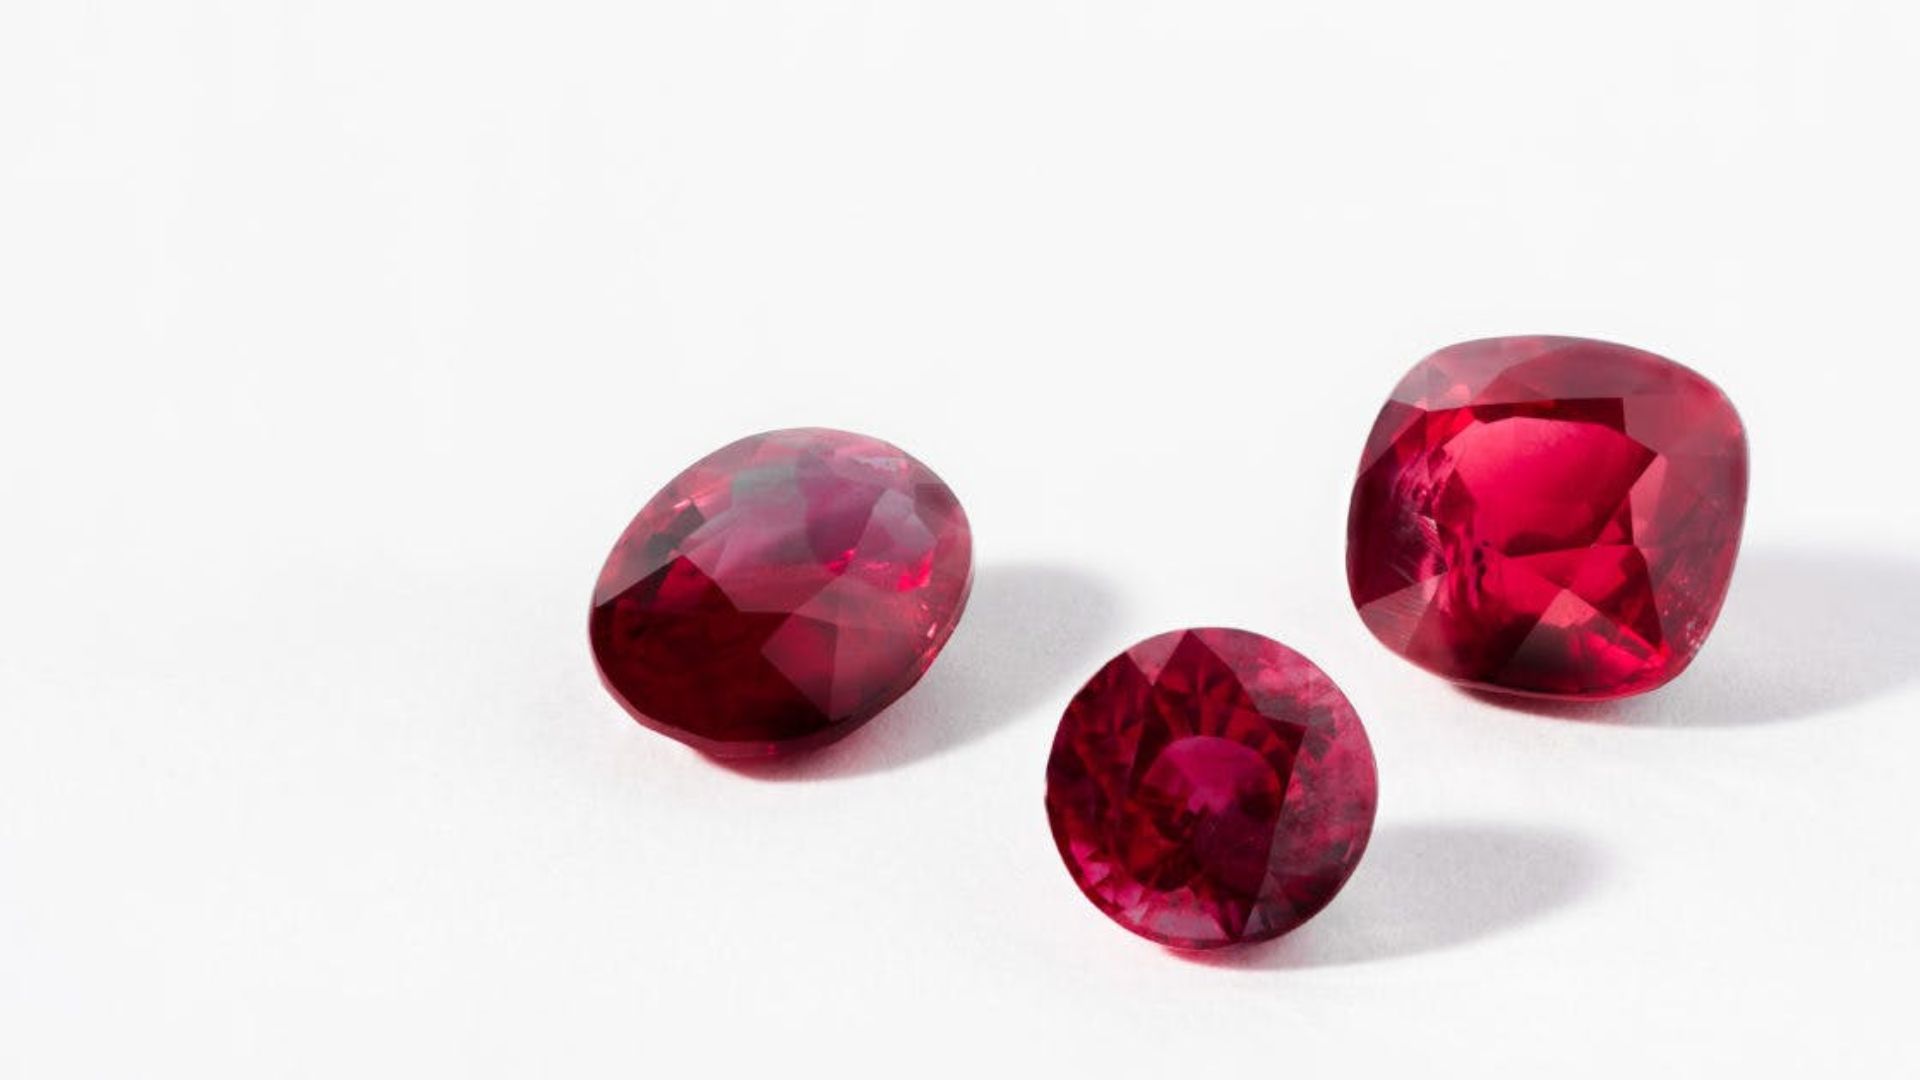 3 Red Colored Gemstones On White Surface